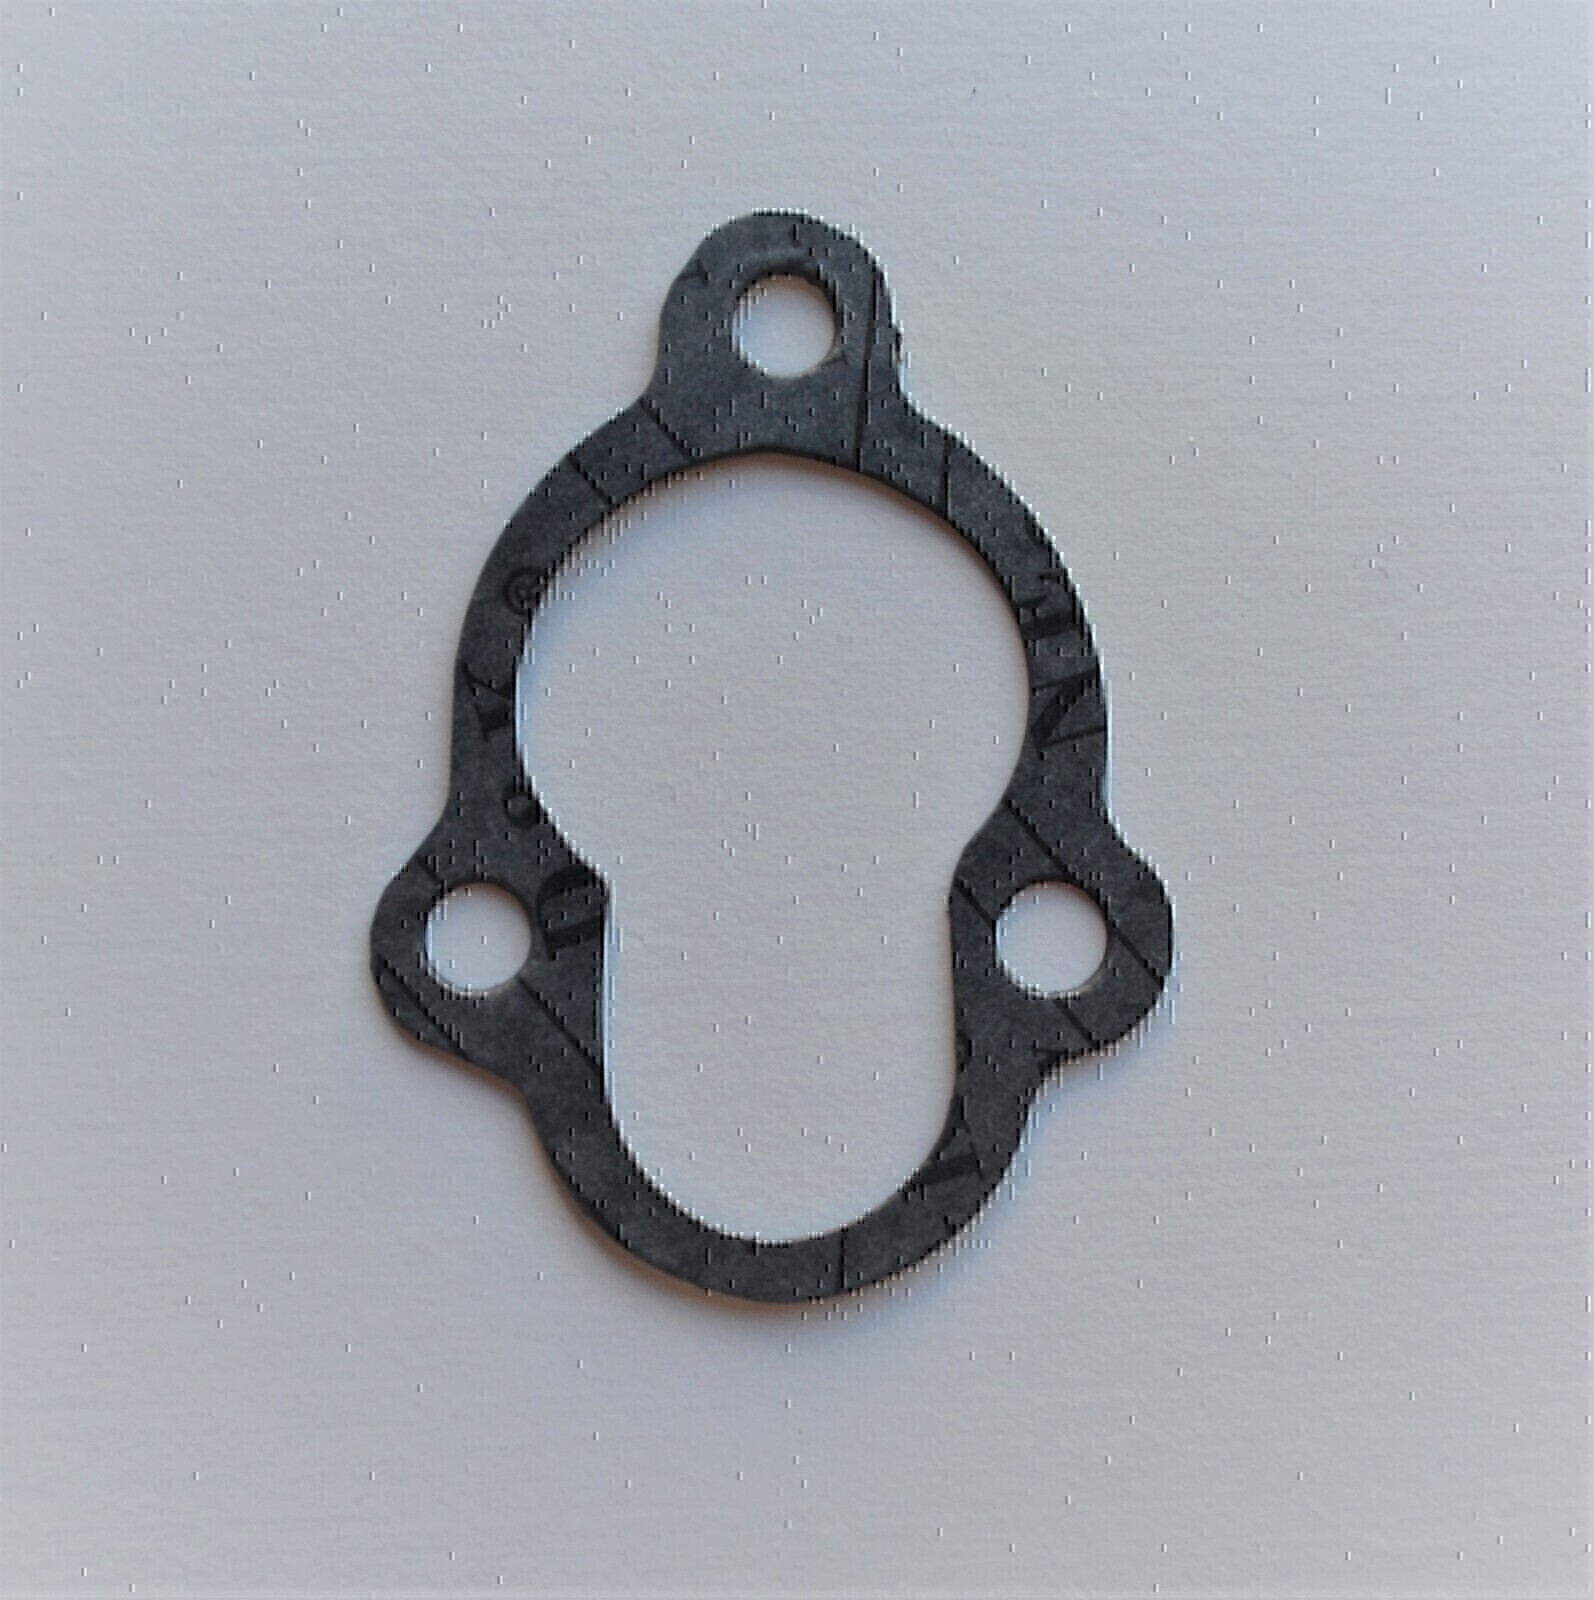 THERMOSTAT GASKET FOR YAMAHA 25 30HP OUTBOARD MOTOR # 655-12414-00